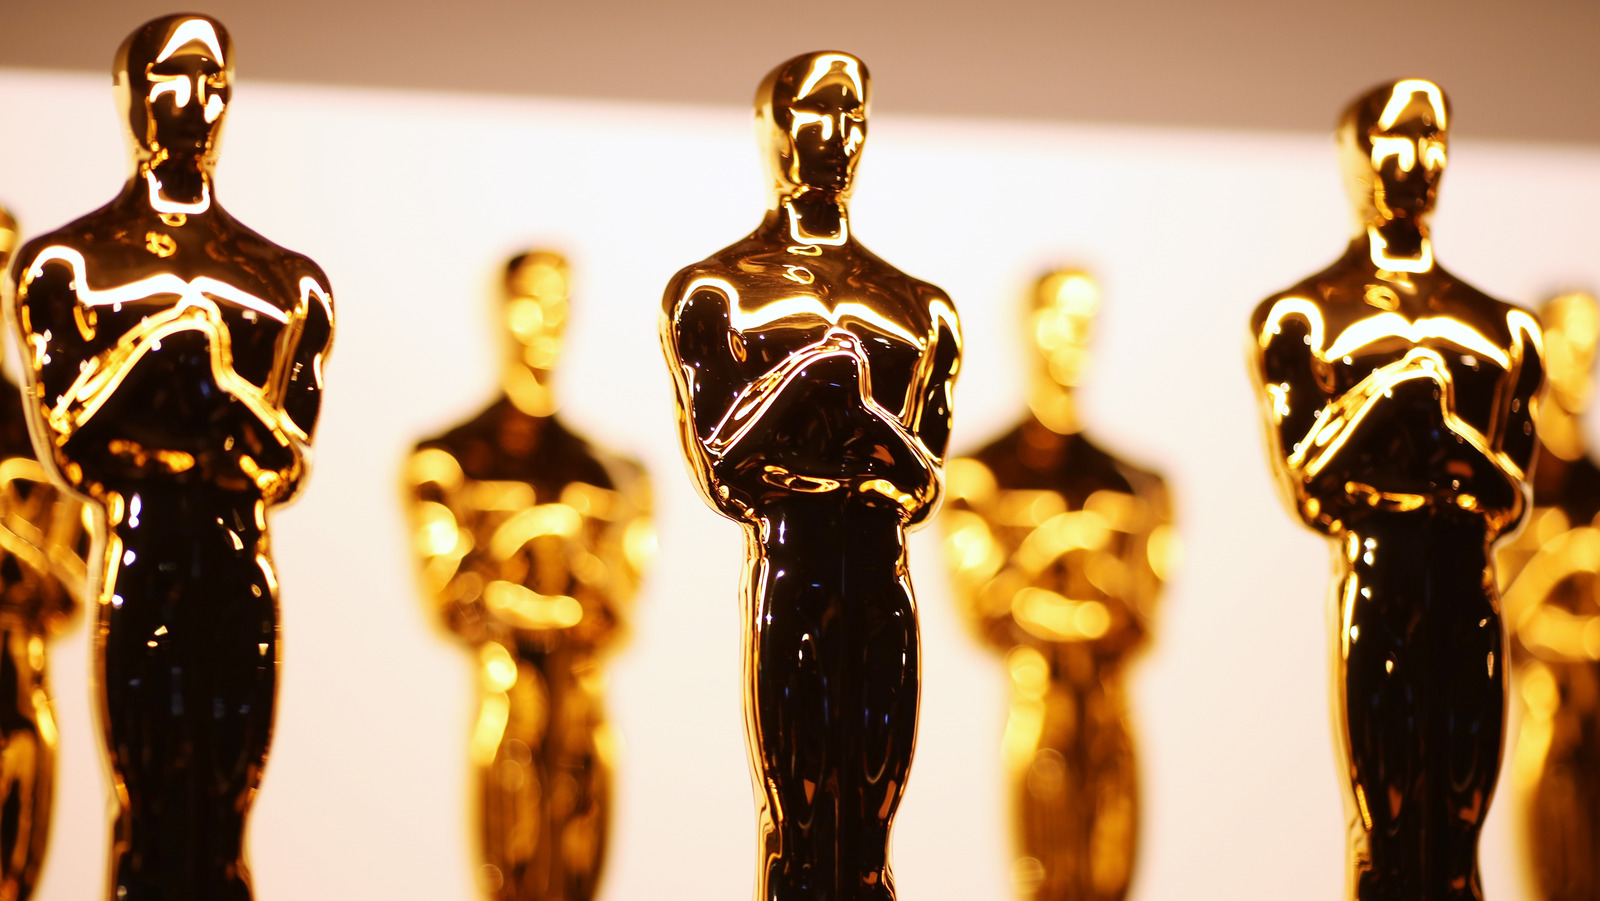 How an Oscar statuette is made